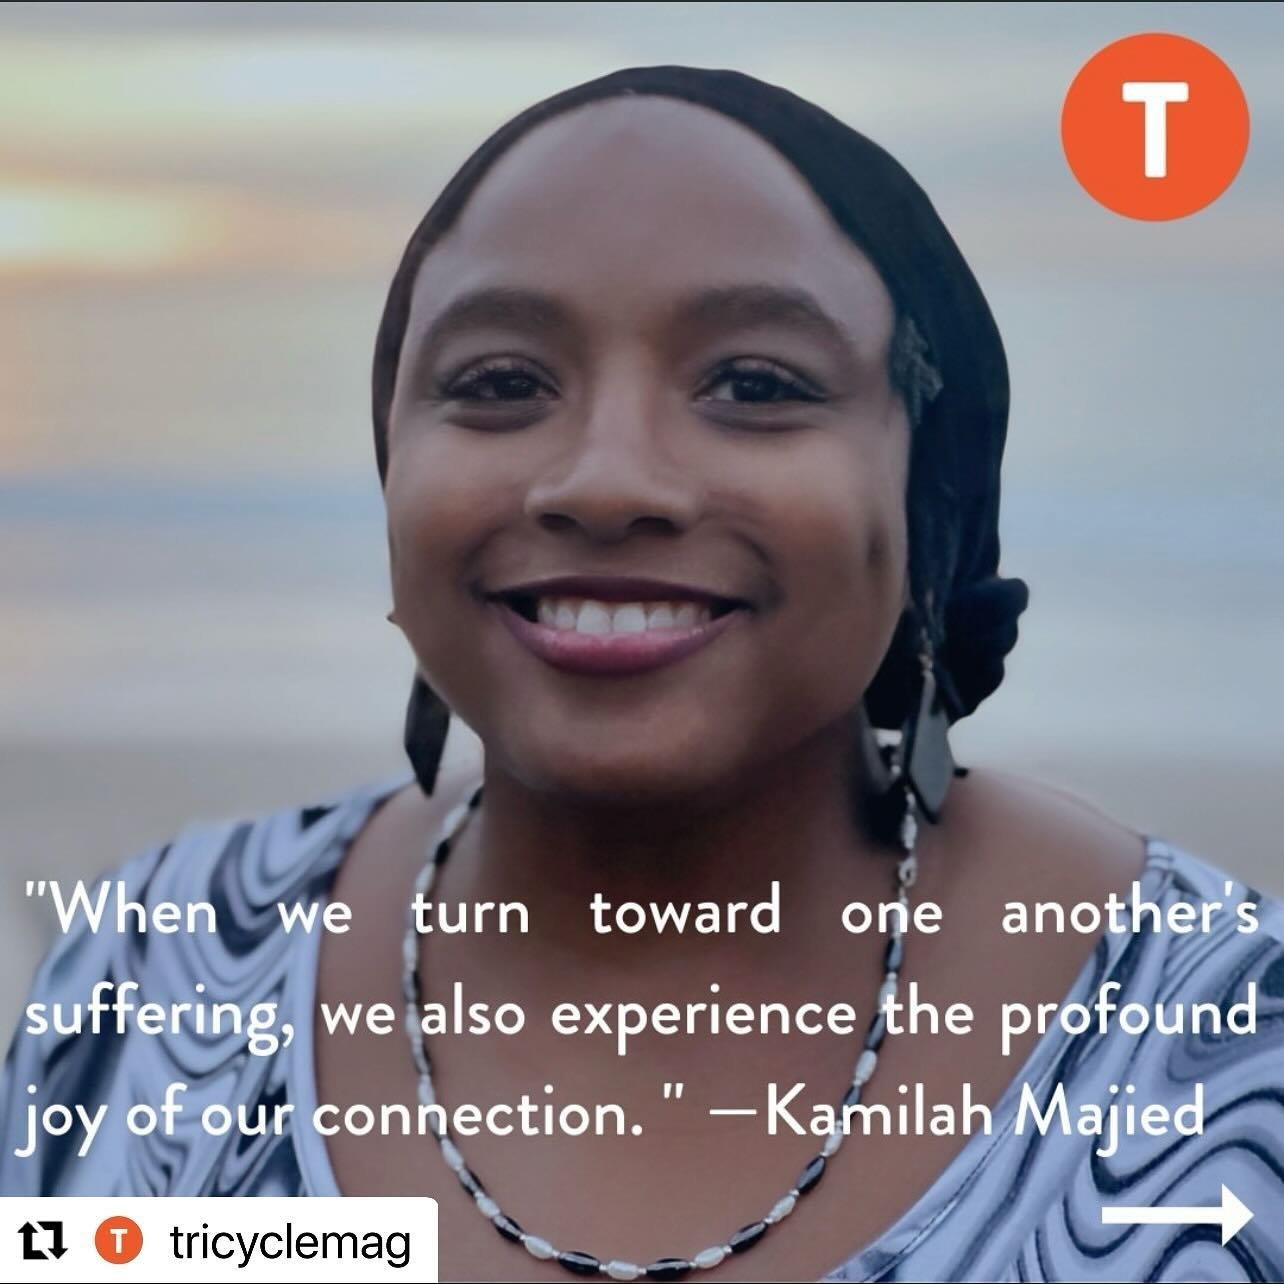 (Images reposted from @tricyclemag) 
I am so appreciative of Tricycle magazine and James Shaheen for this joyful contemplative dialogue.

#podcast #tricycletalks #interview #Buddhism #BlackWisdom #joy #justice #courage #joyfullyjust